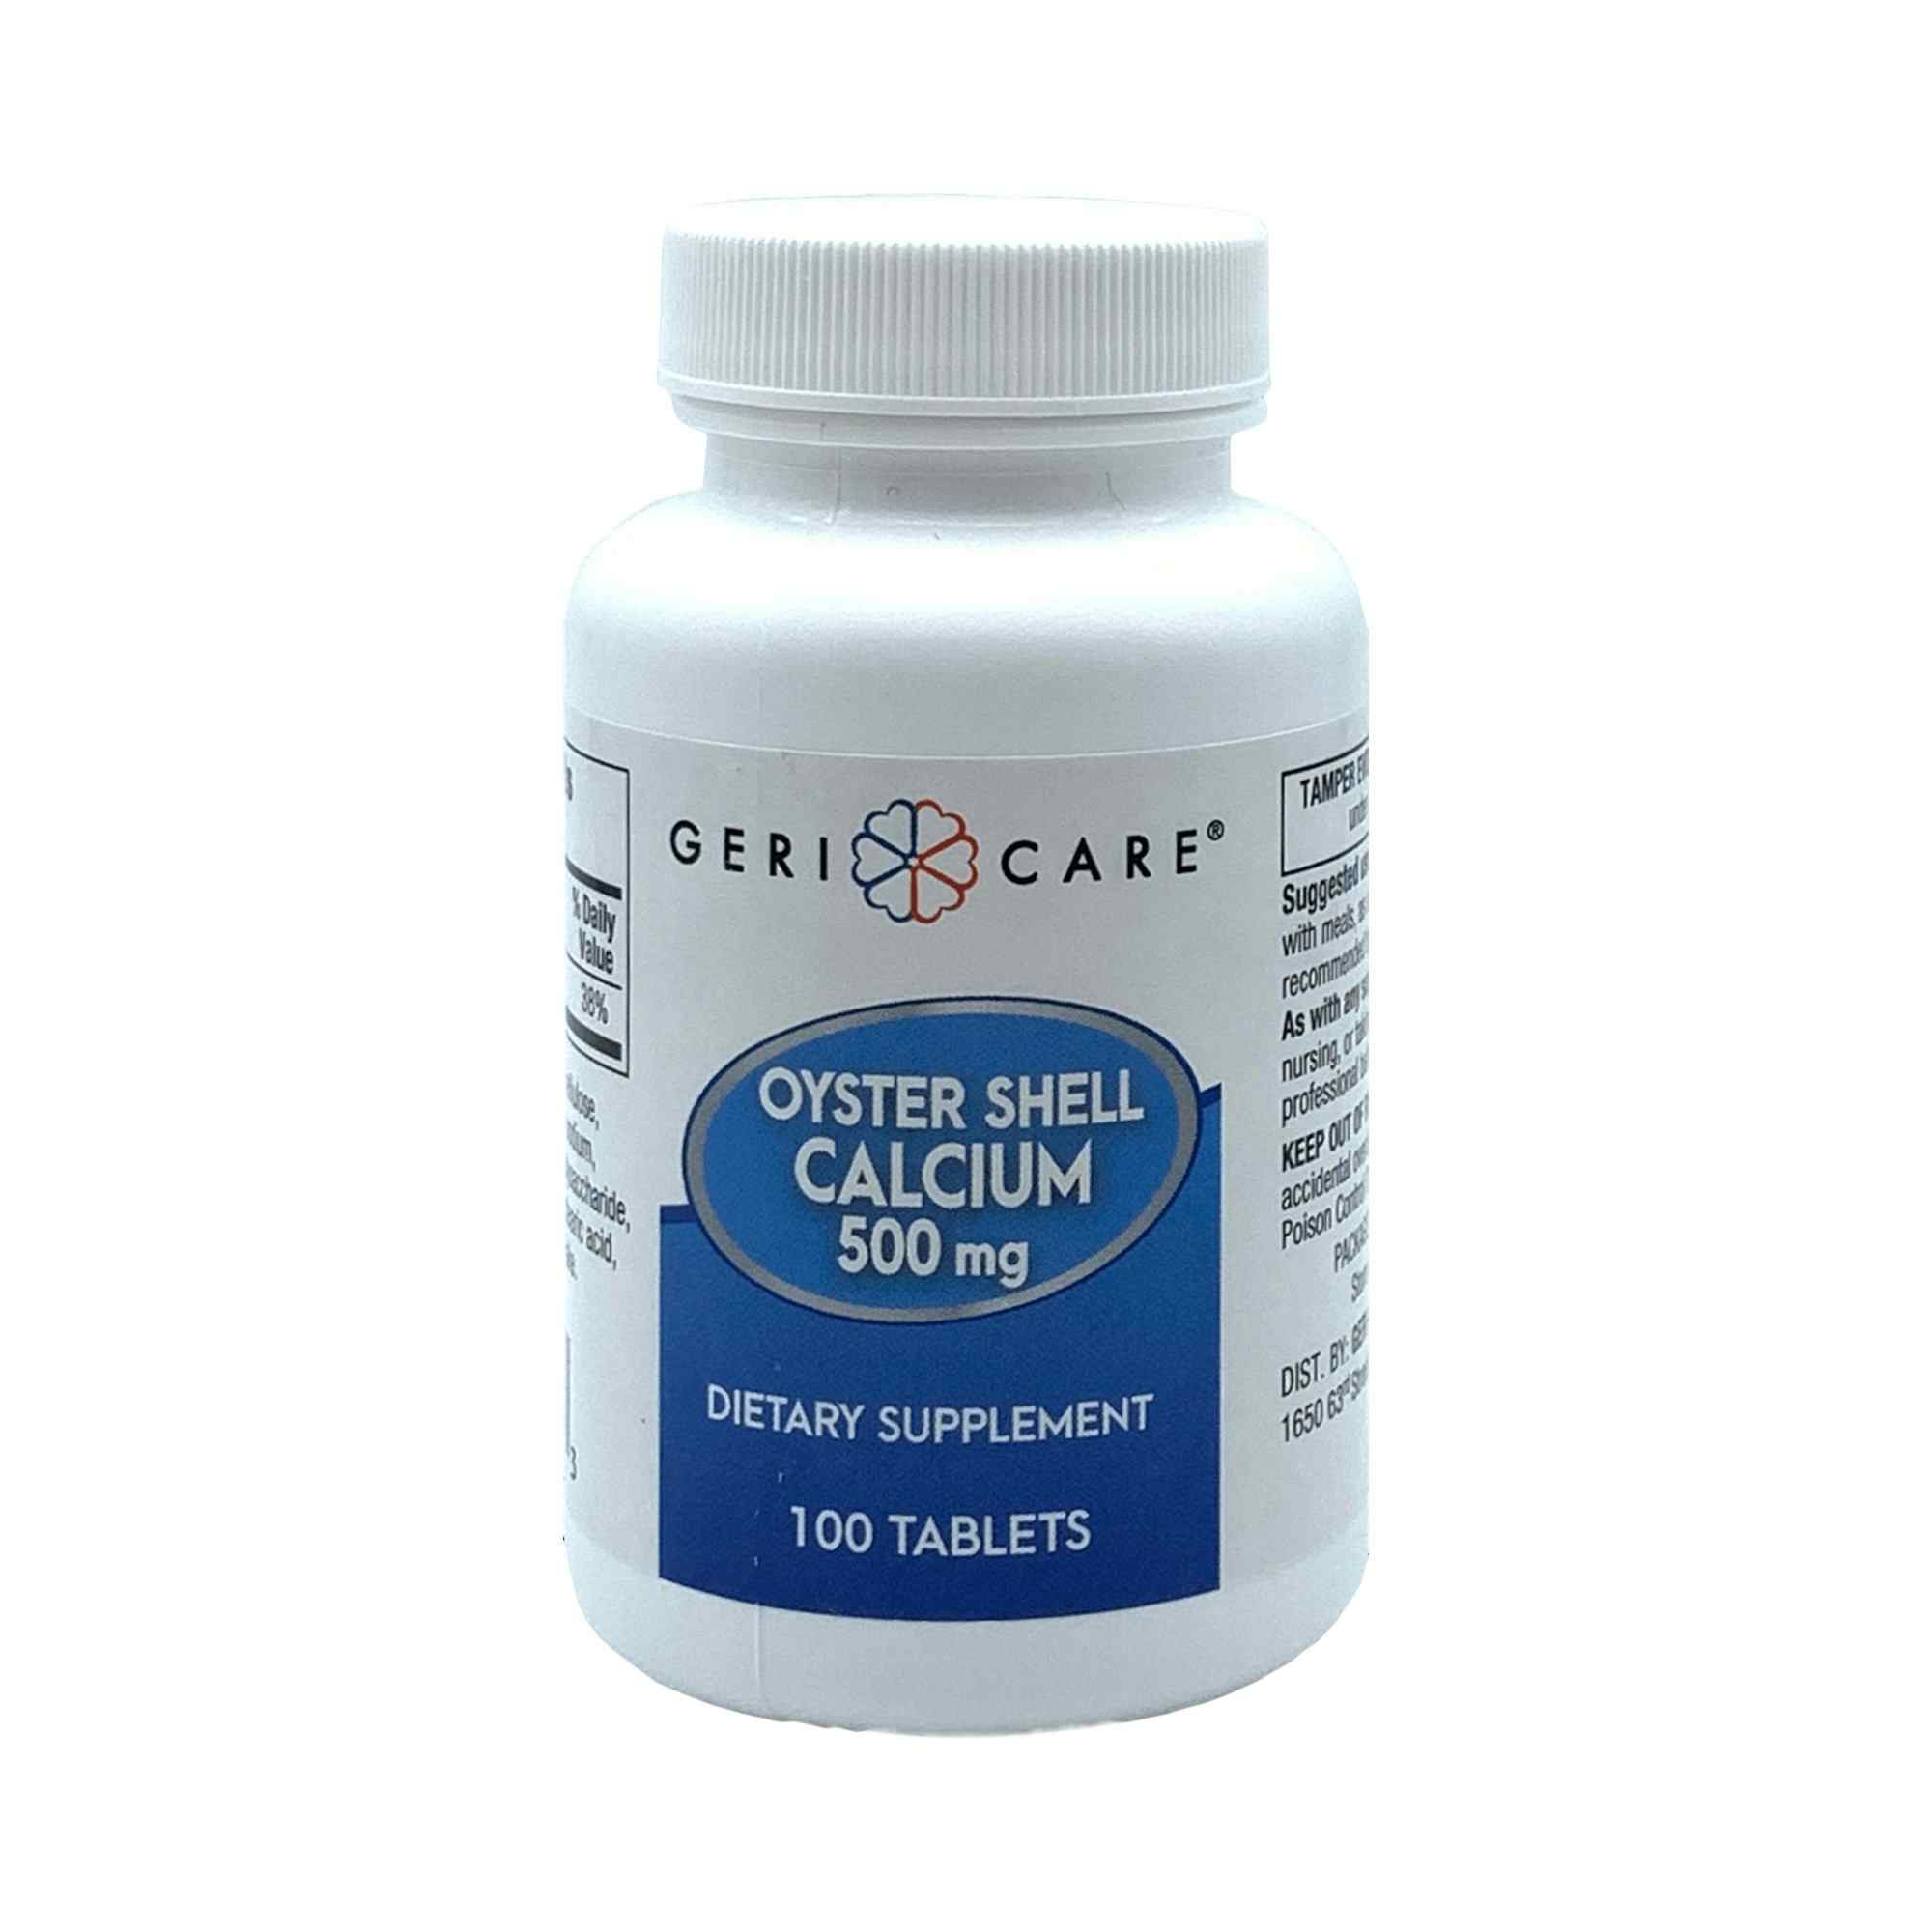 Geri-Care Oyster Shell Calcium Dietary Supplement, 500 mg, 100 Tablets, 741-01-GCP, 1 Bottle